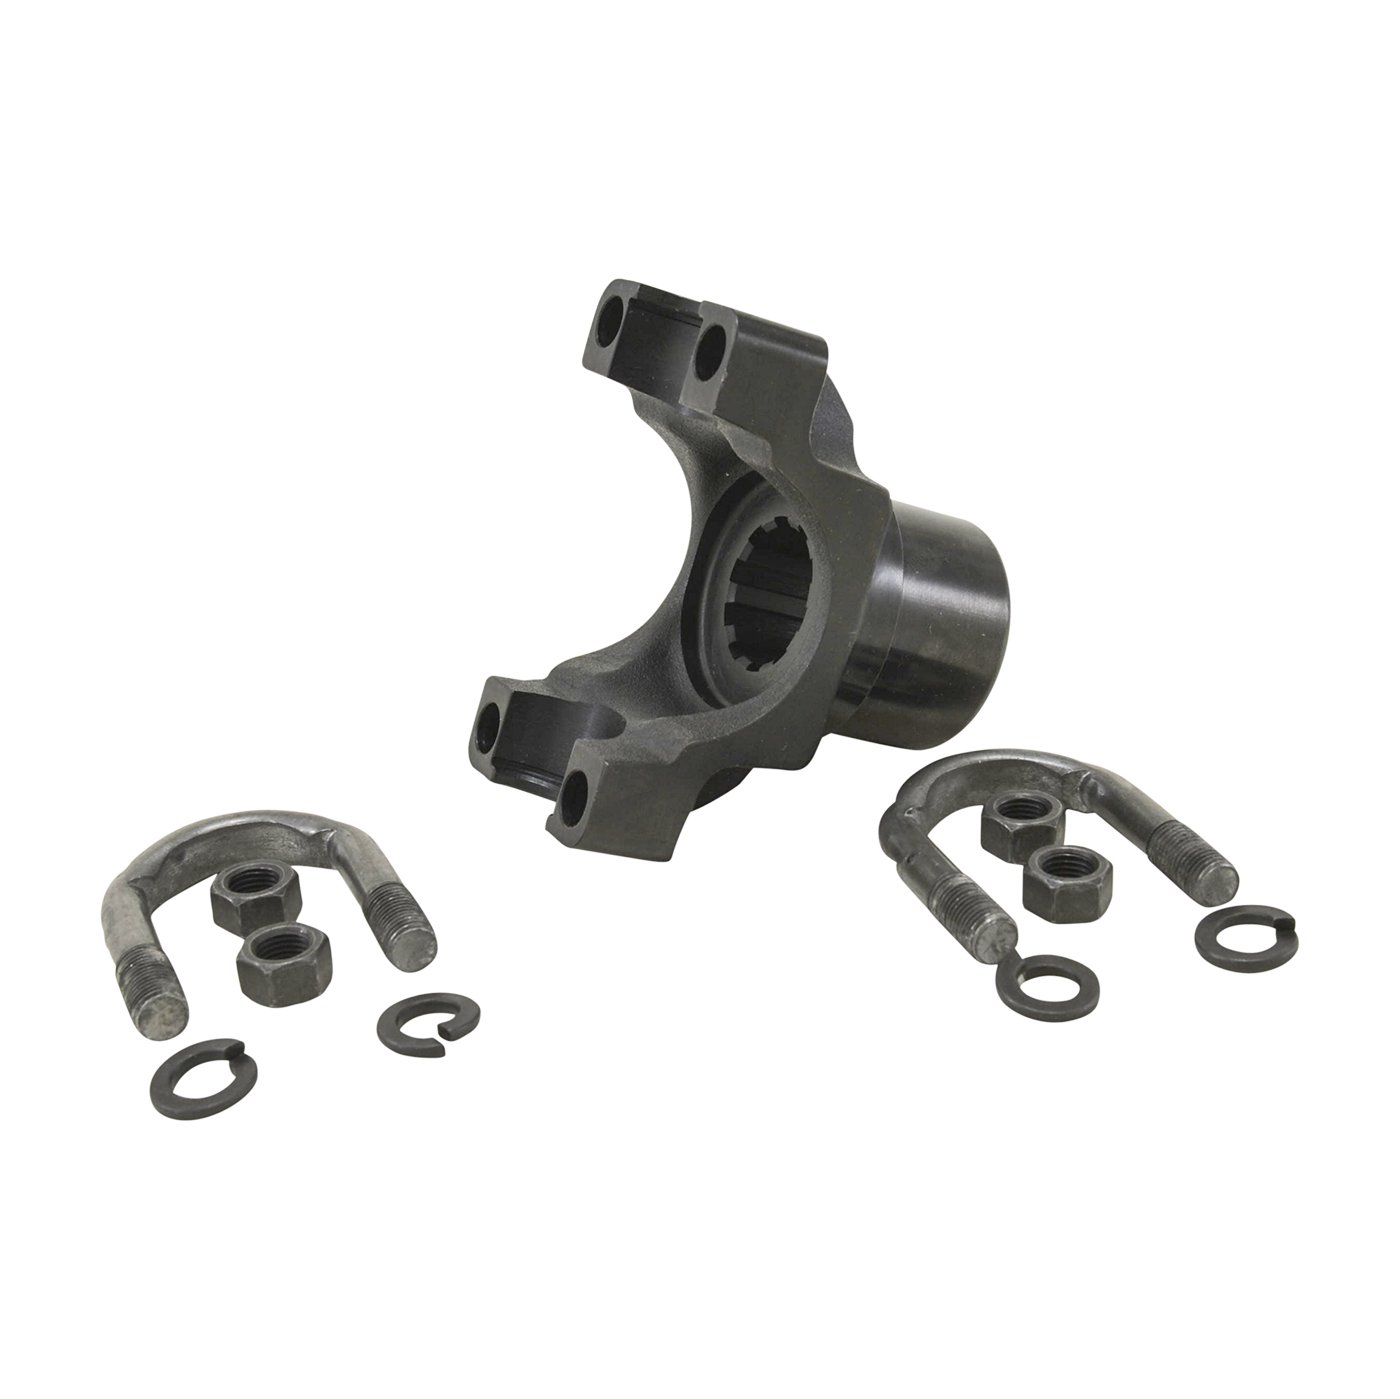 Extra Hd Yoke For Chrysler 8.75 in. W/10 Spline Pinion And A 1350 U-Joint